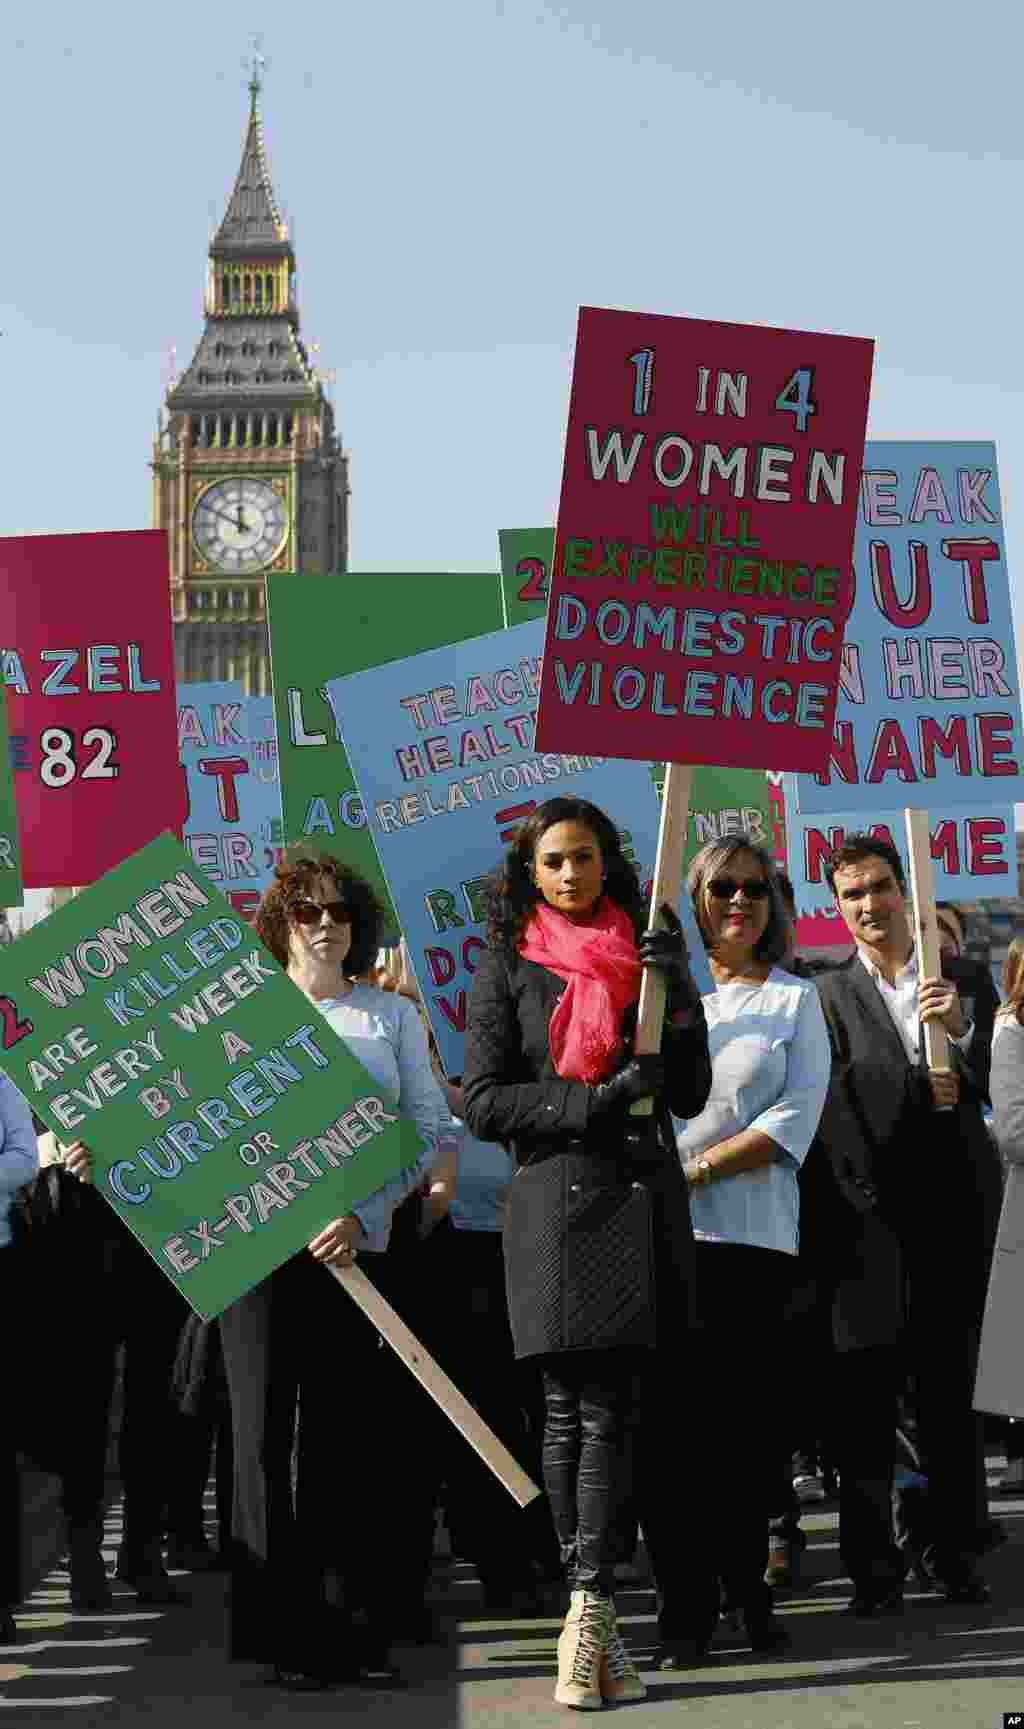 British television presenter Alesha Dixon leads people in a demonstration against domestic violence near Big Ben in the lead up to International Women&#39;s Day, London, March 5, 2013.